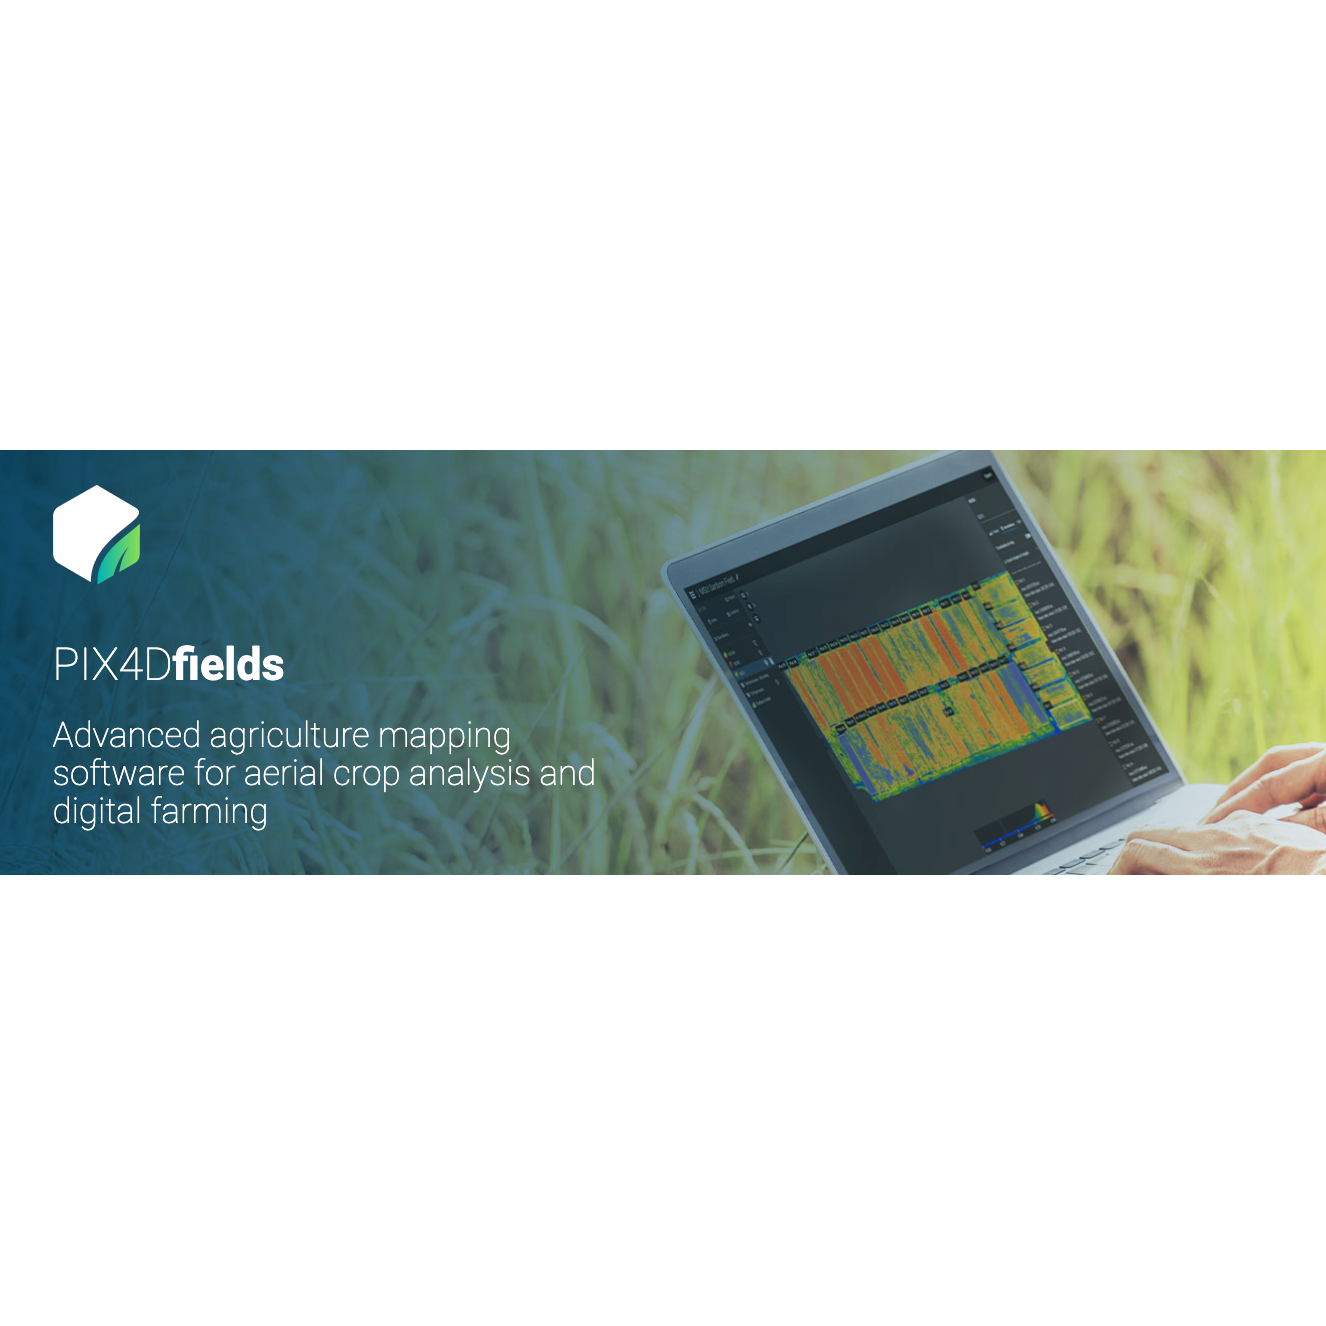 PIX4Dfields Agriculture mapping software